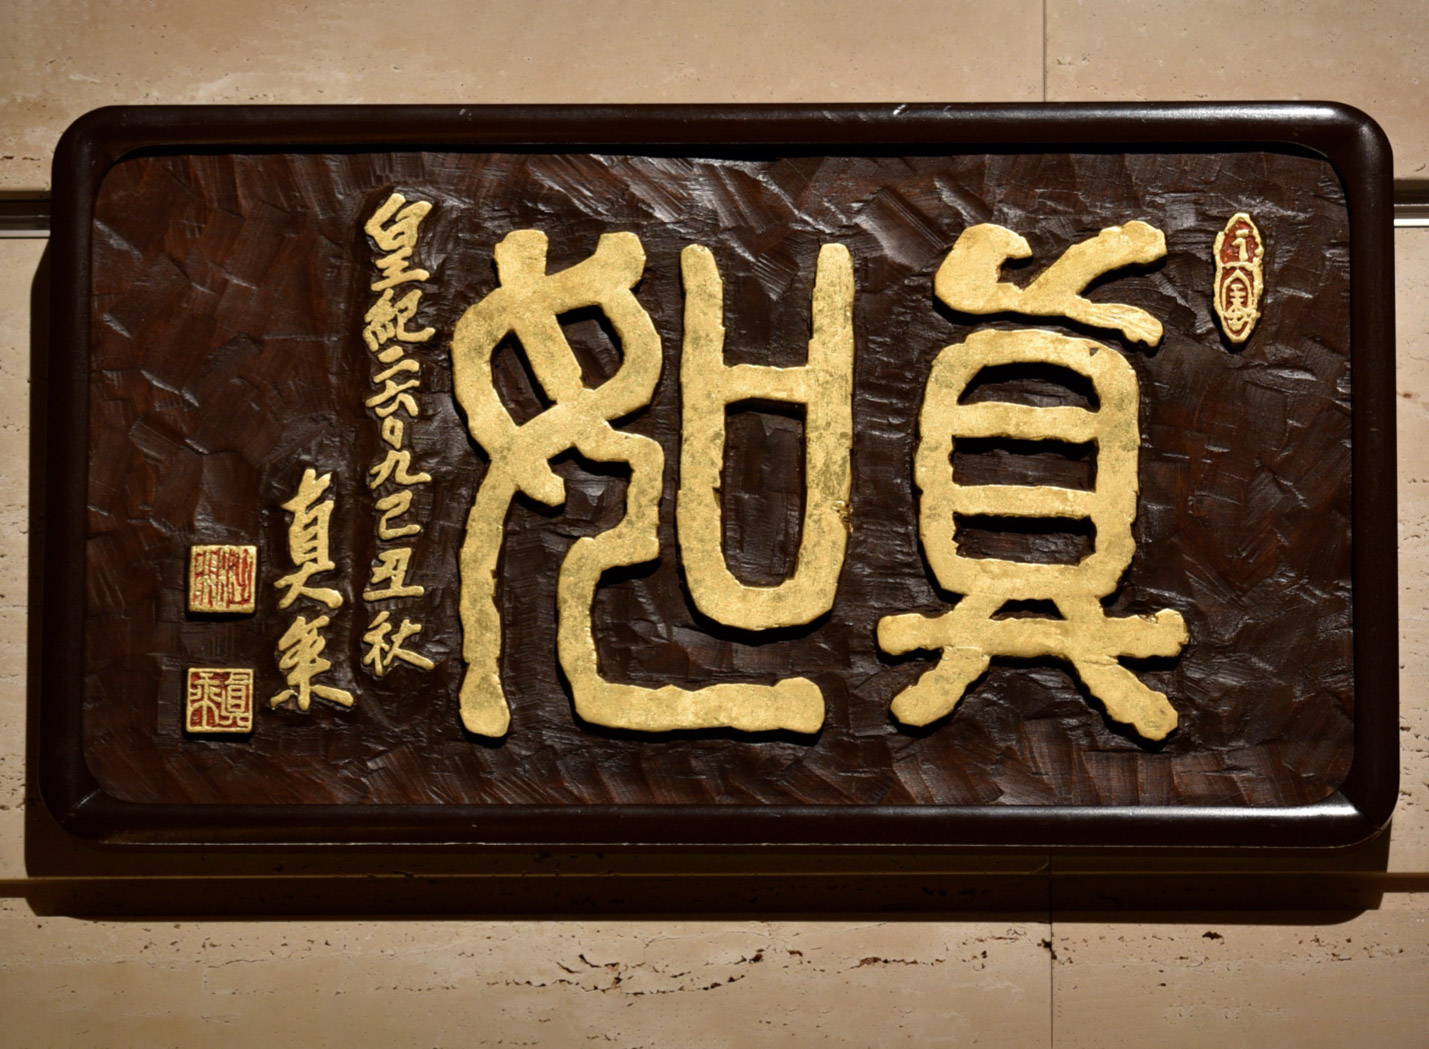 A dark brown slab of wood is carved with stylized, thick lined Japanese characters in gold, embellished with nearby vertically aligned calligraphy in gold and red and gold calligraphic stamps.